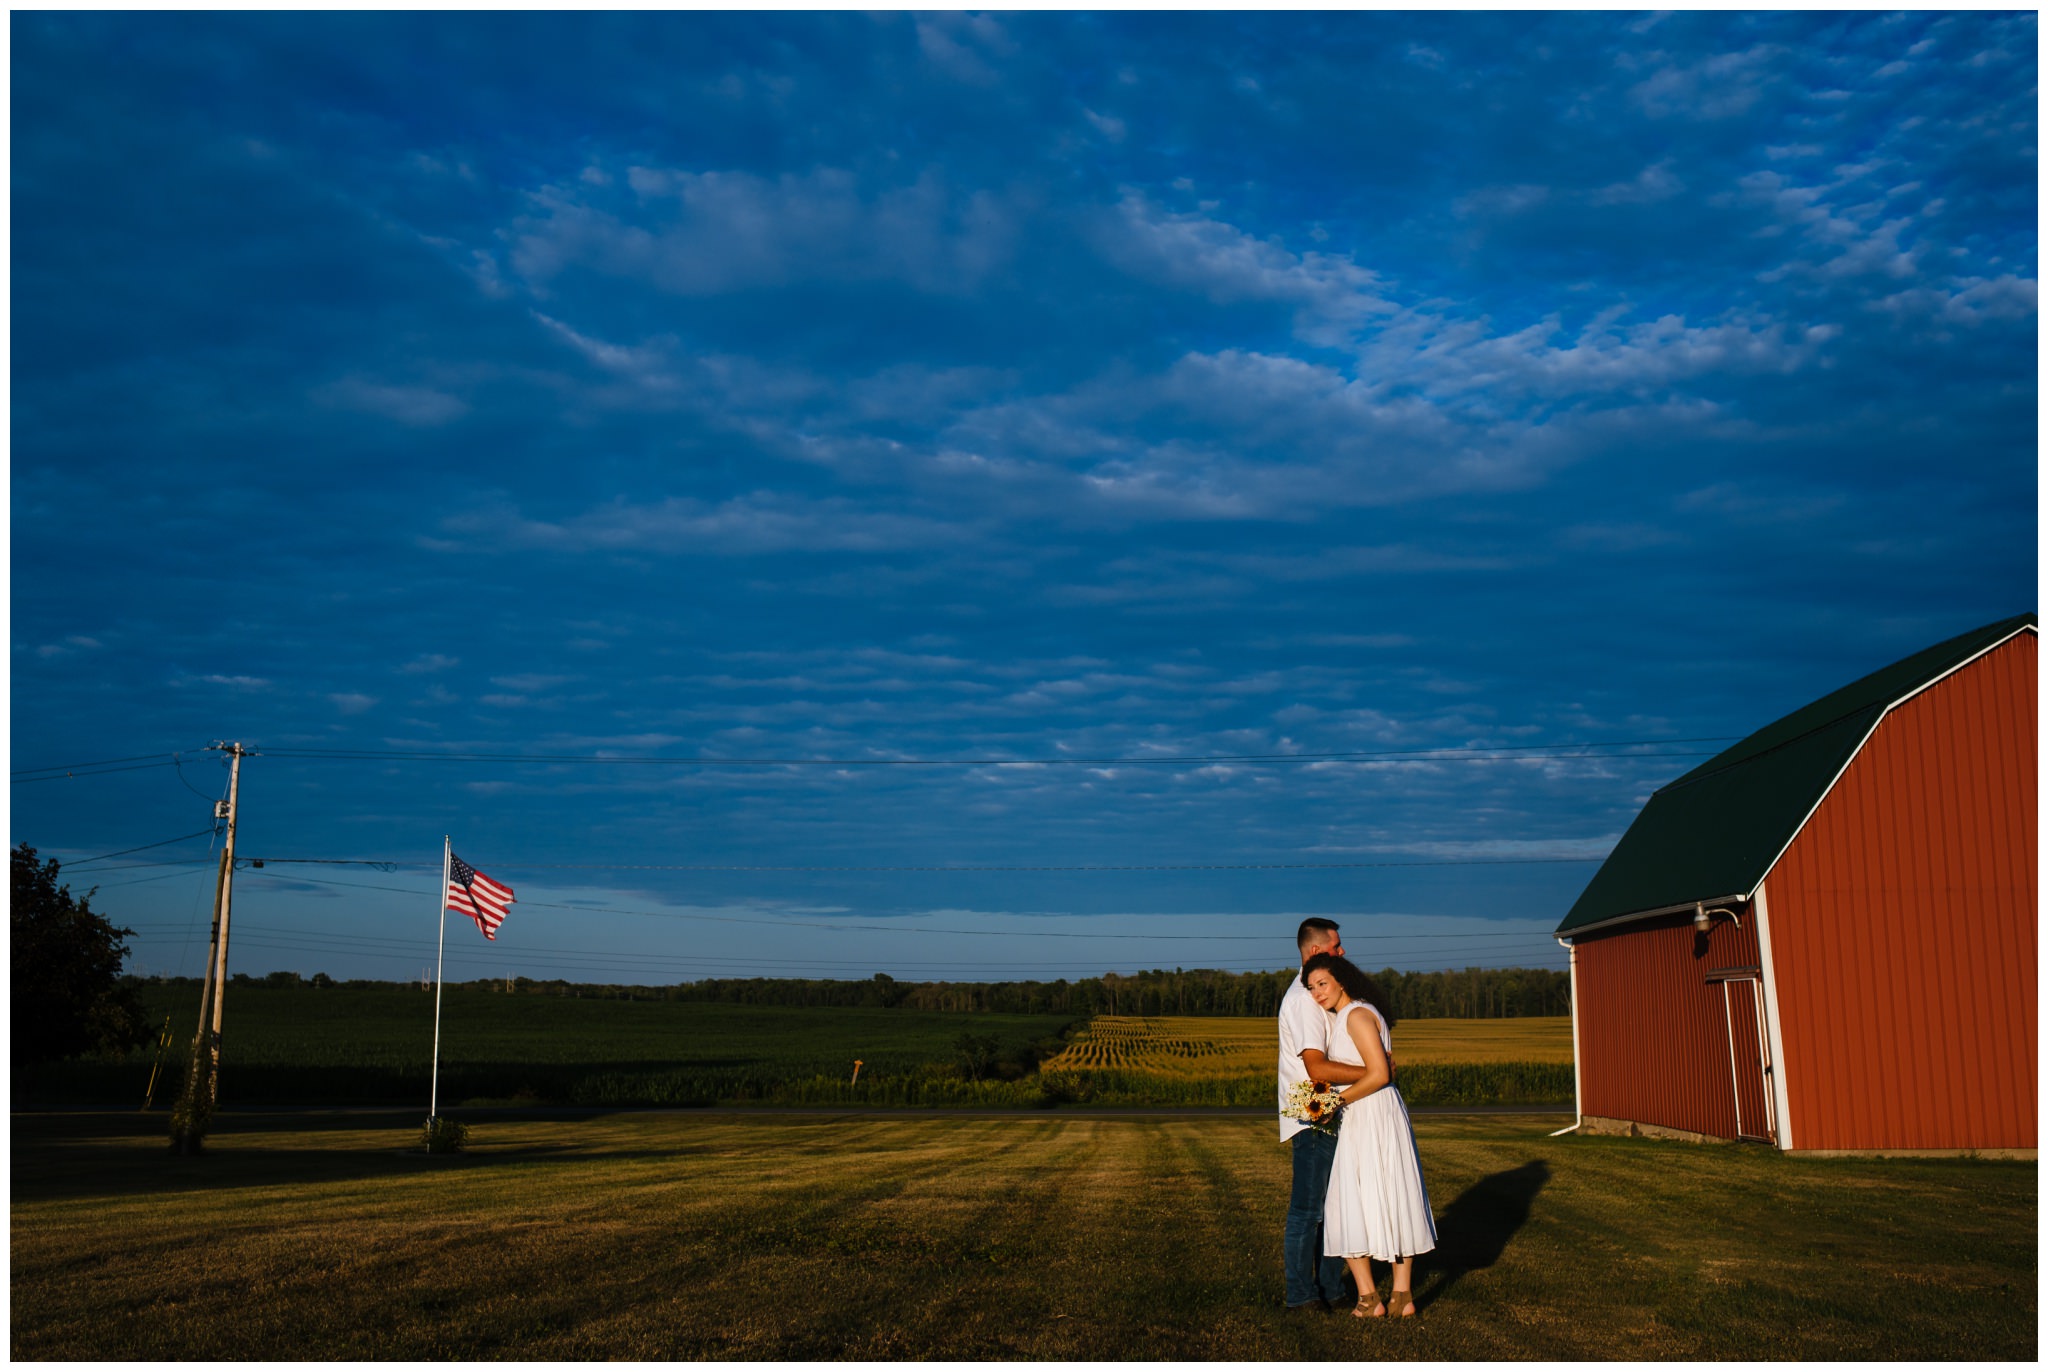 A woman rests her head on her fiancé's
8 shoulder. A red barn is behind them.